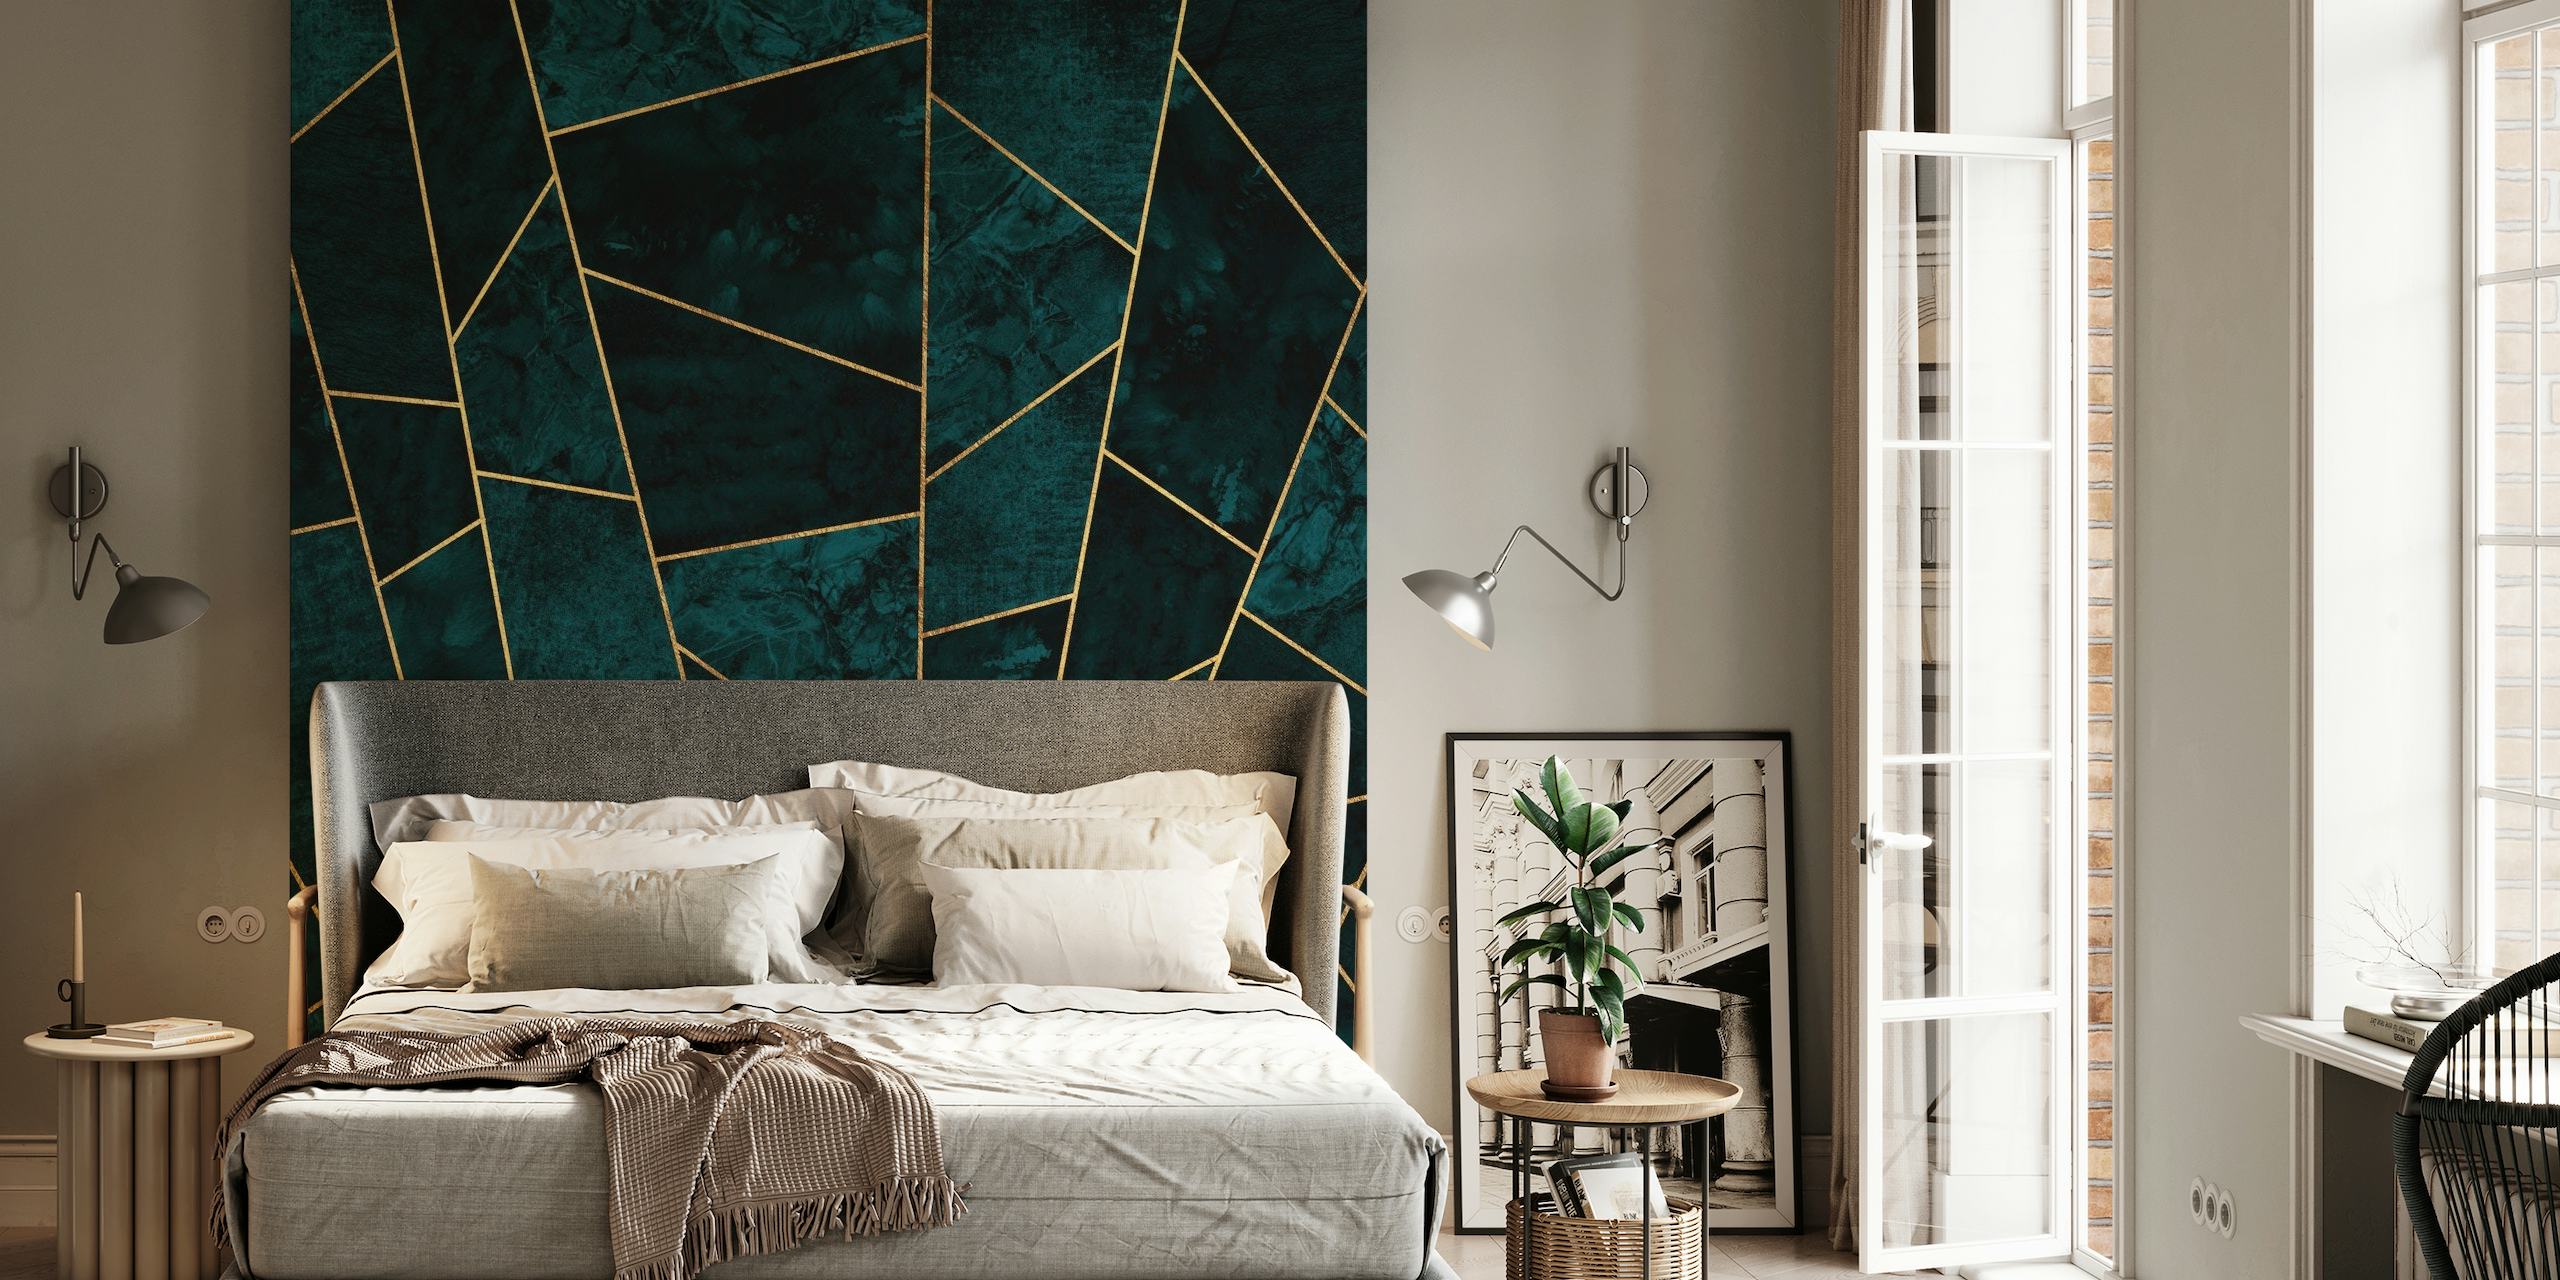 Luxury Teal Abstract wall mural with golden geometric lines on a dark teal background